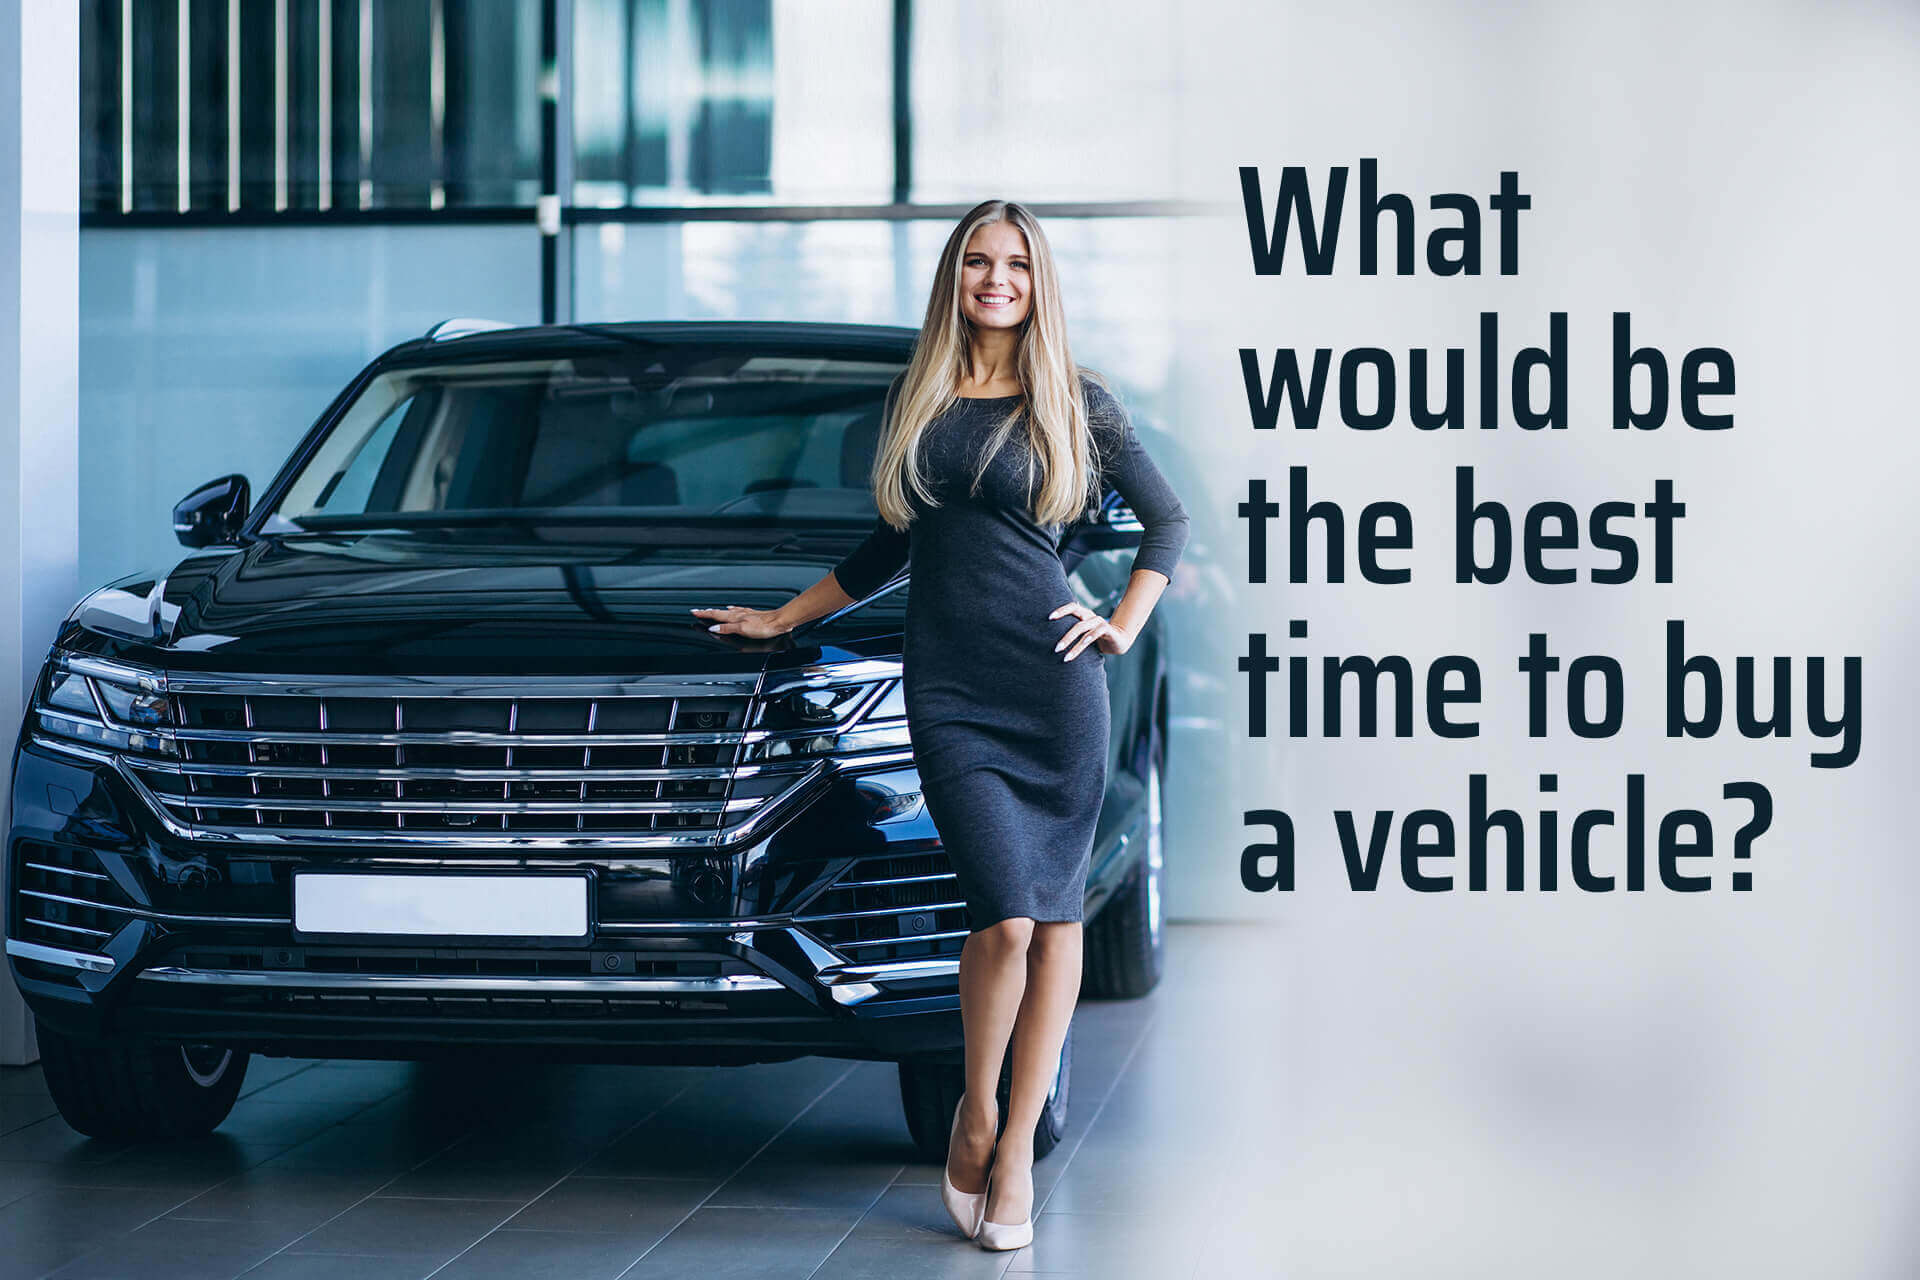 What Would Be the Best Time to Buy a Vehicle?